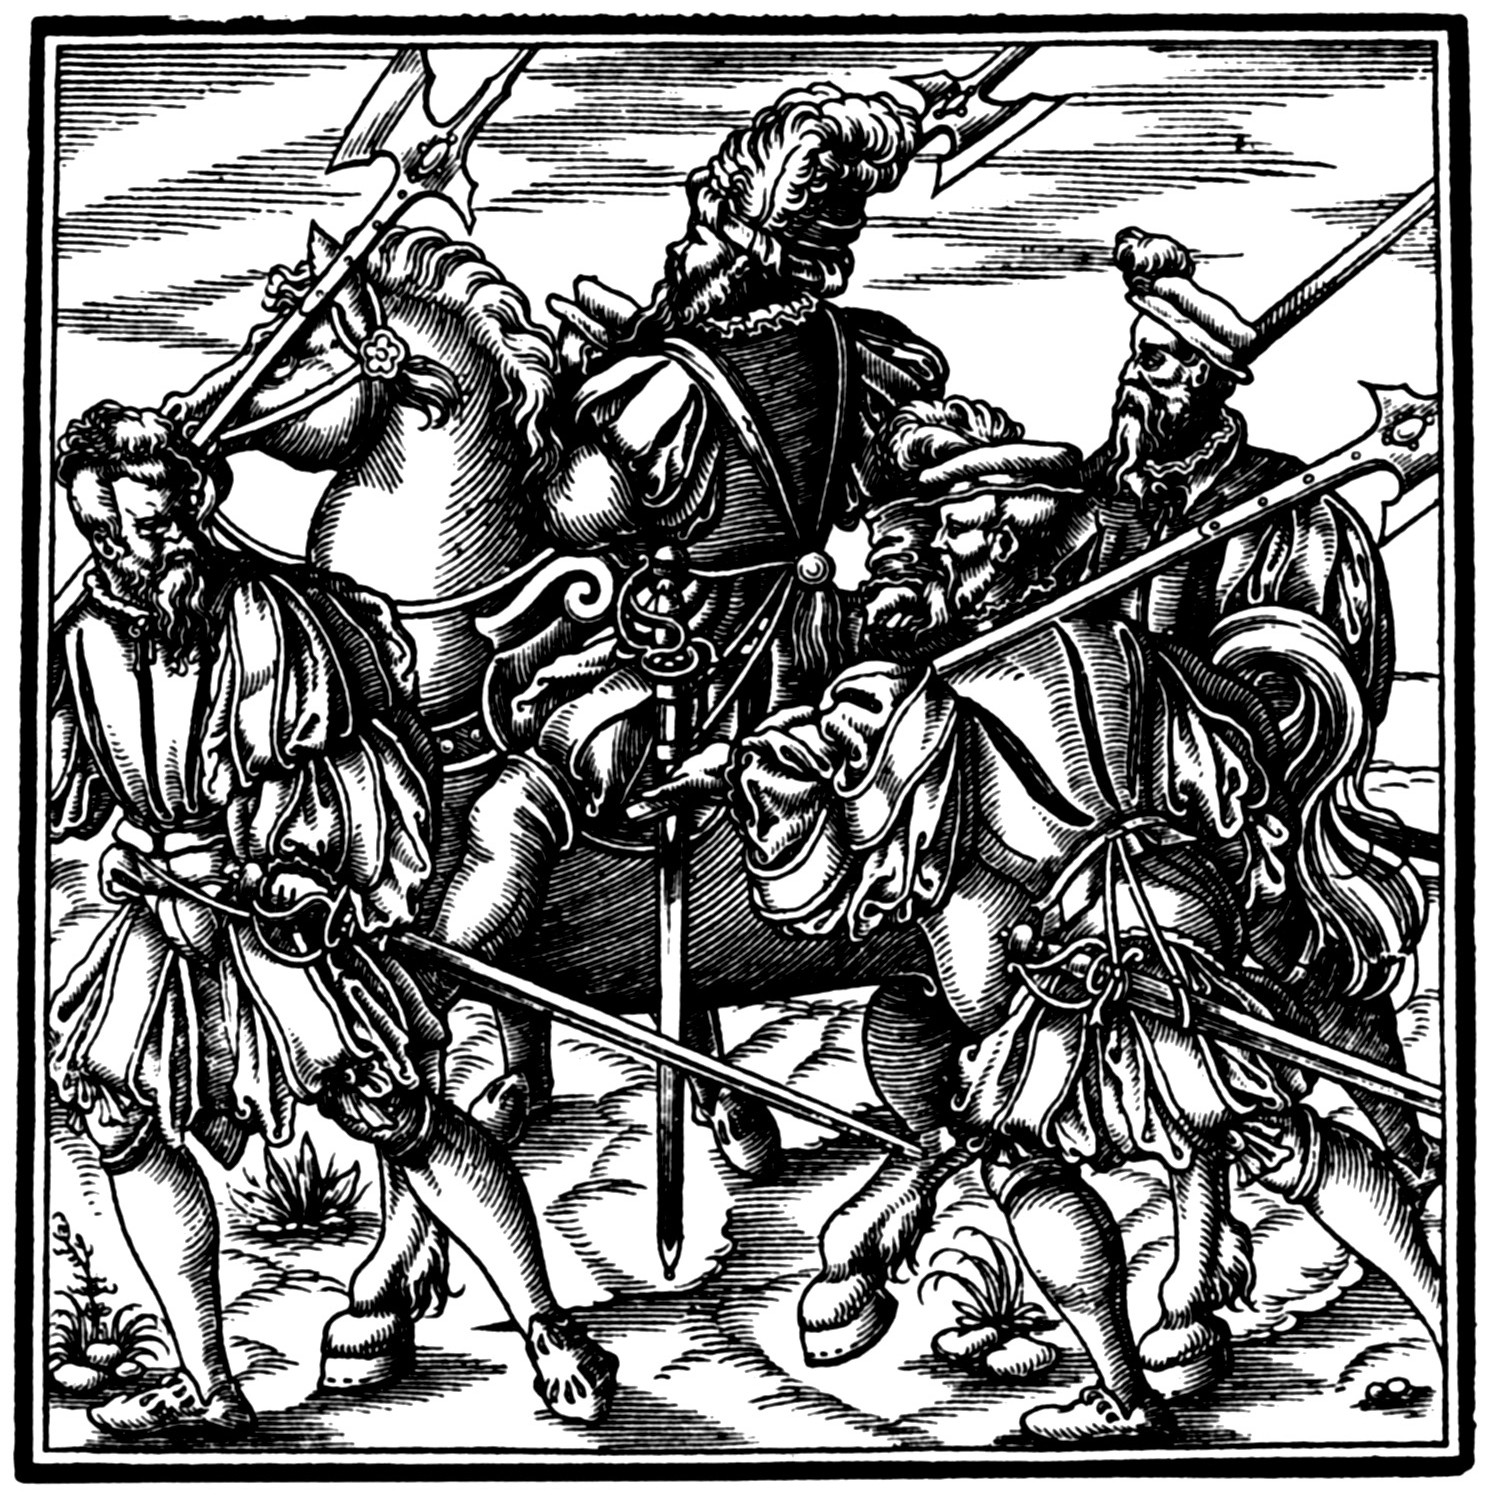 Another 16th century German woodcut reveals a mercenary in all his ostentatious finery and bristling armature. Some 12,000 Landsknects fought at Pavia on both sides. 